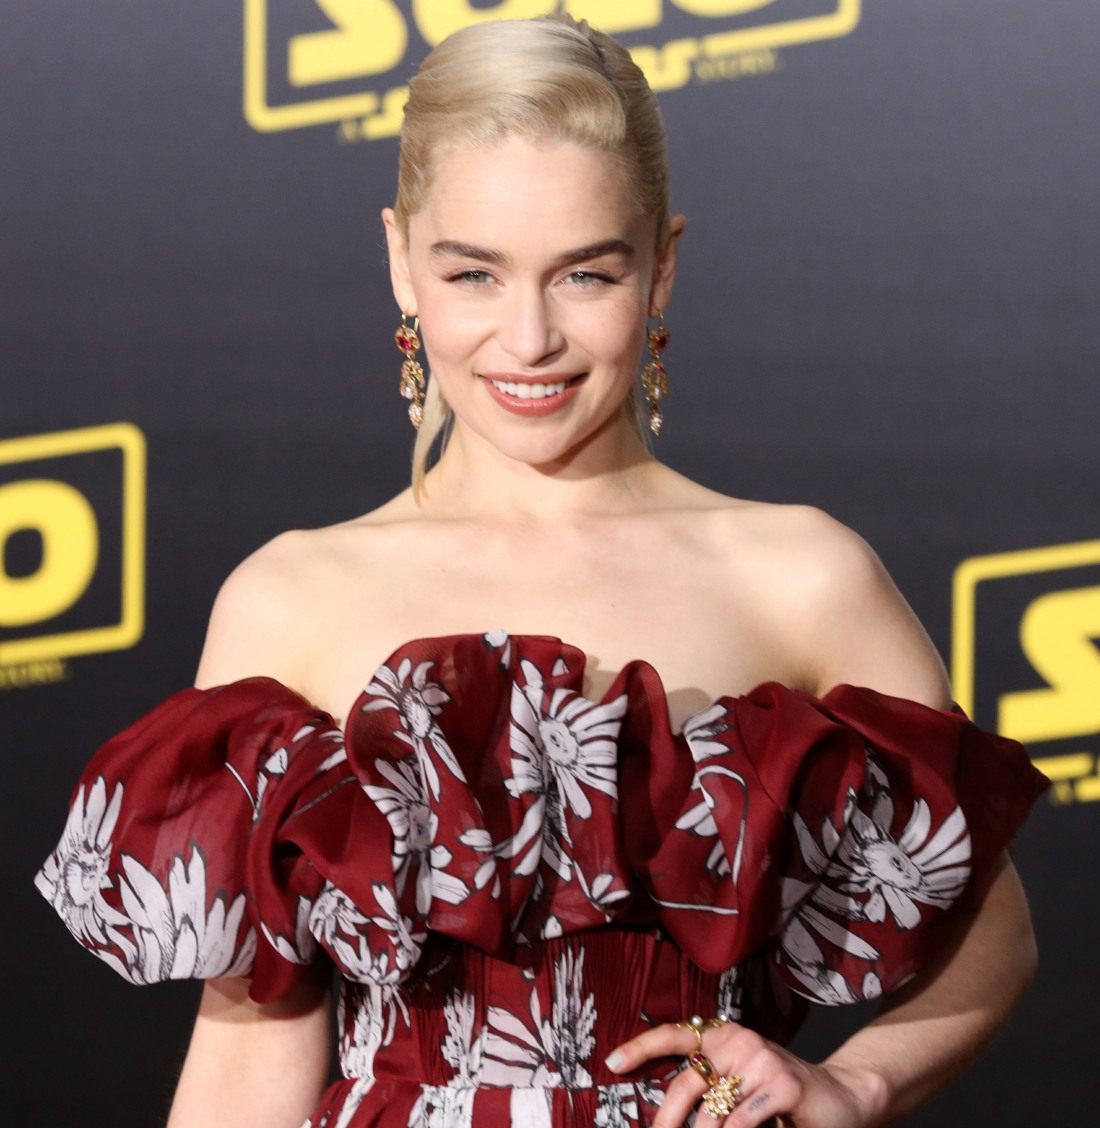 Premiere of 'Solo: A Star Wars Story'